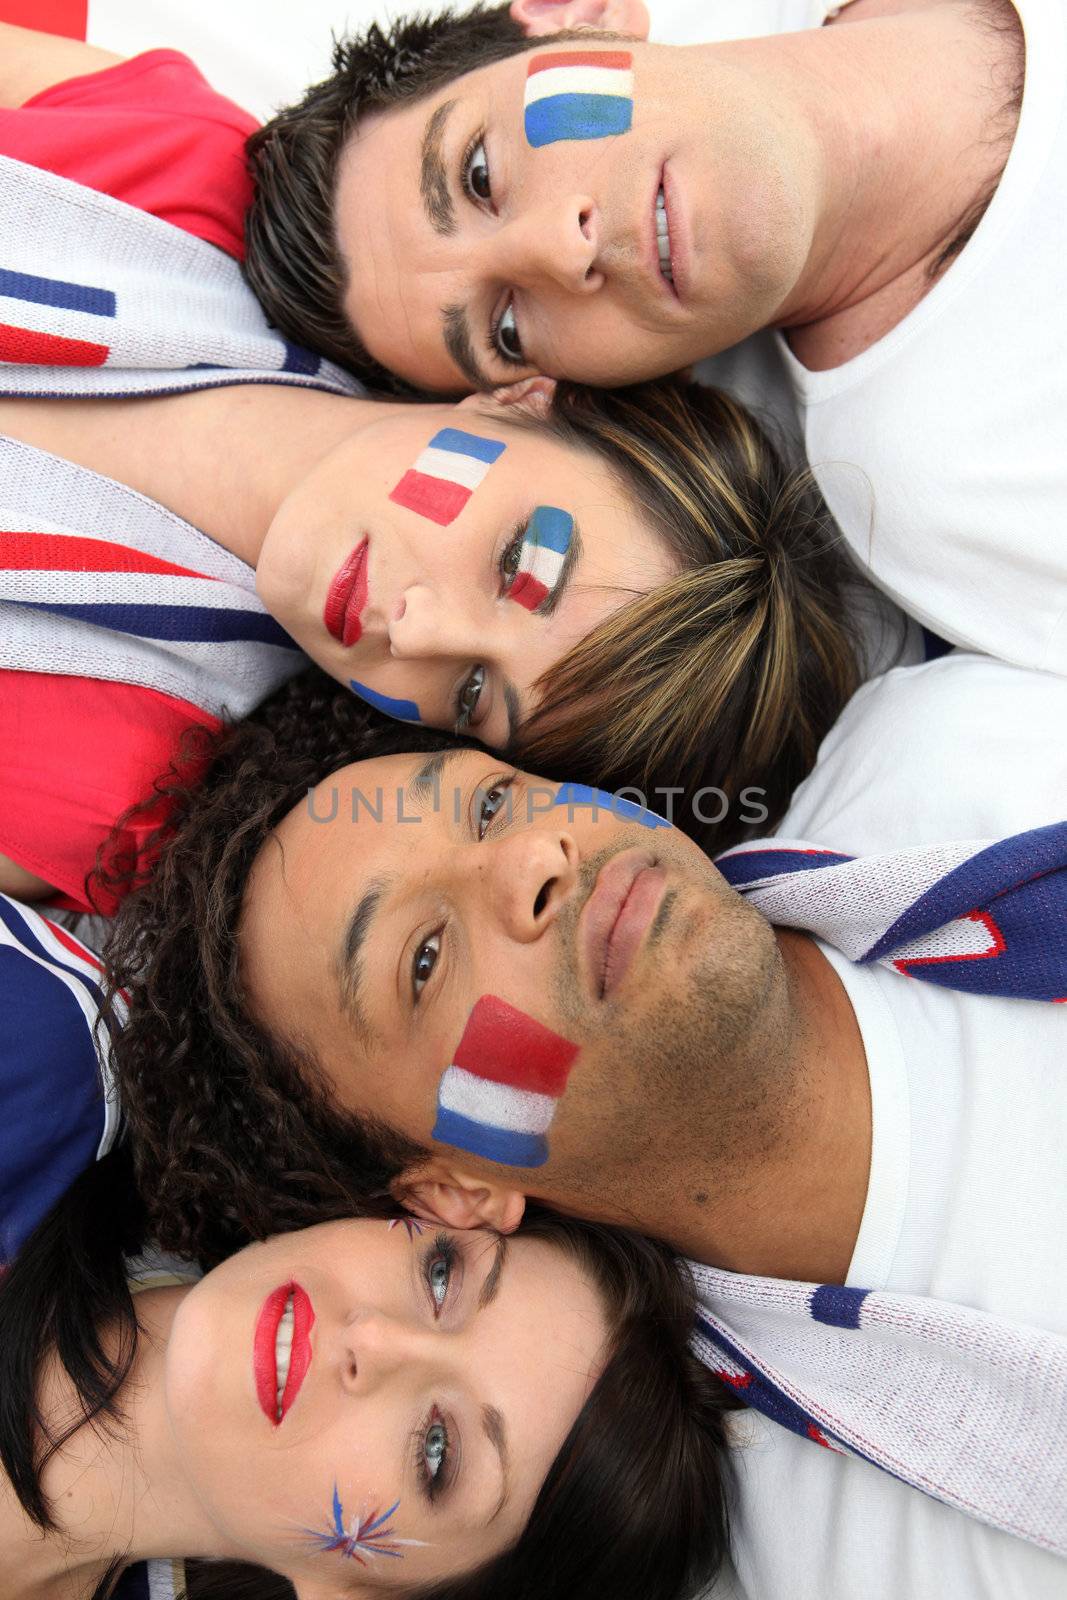 Four French sports fans laying together by phovoir